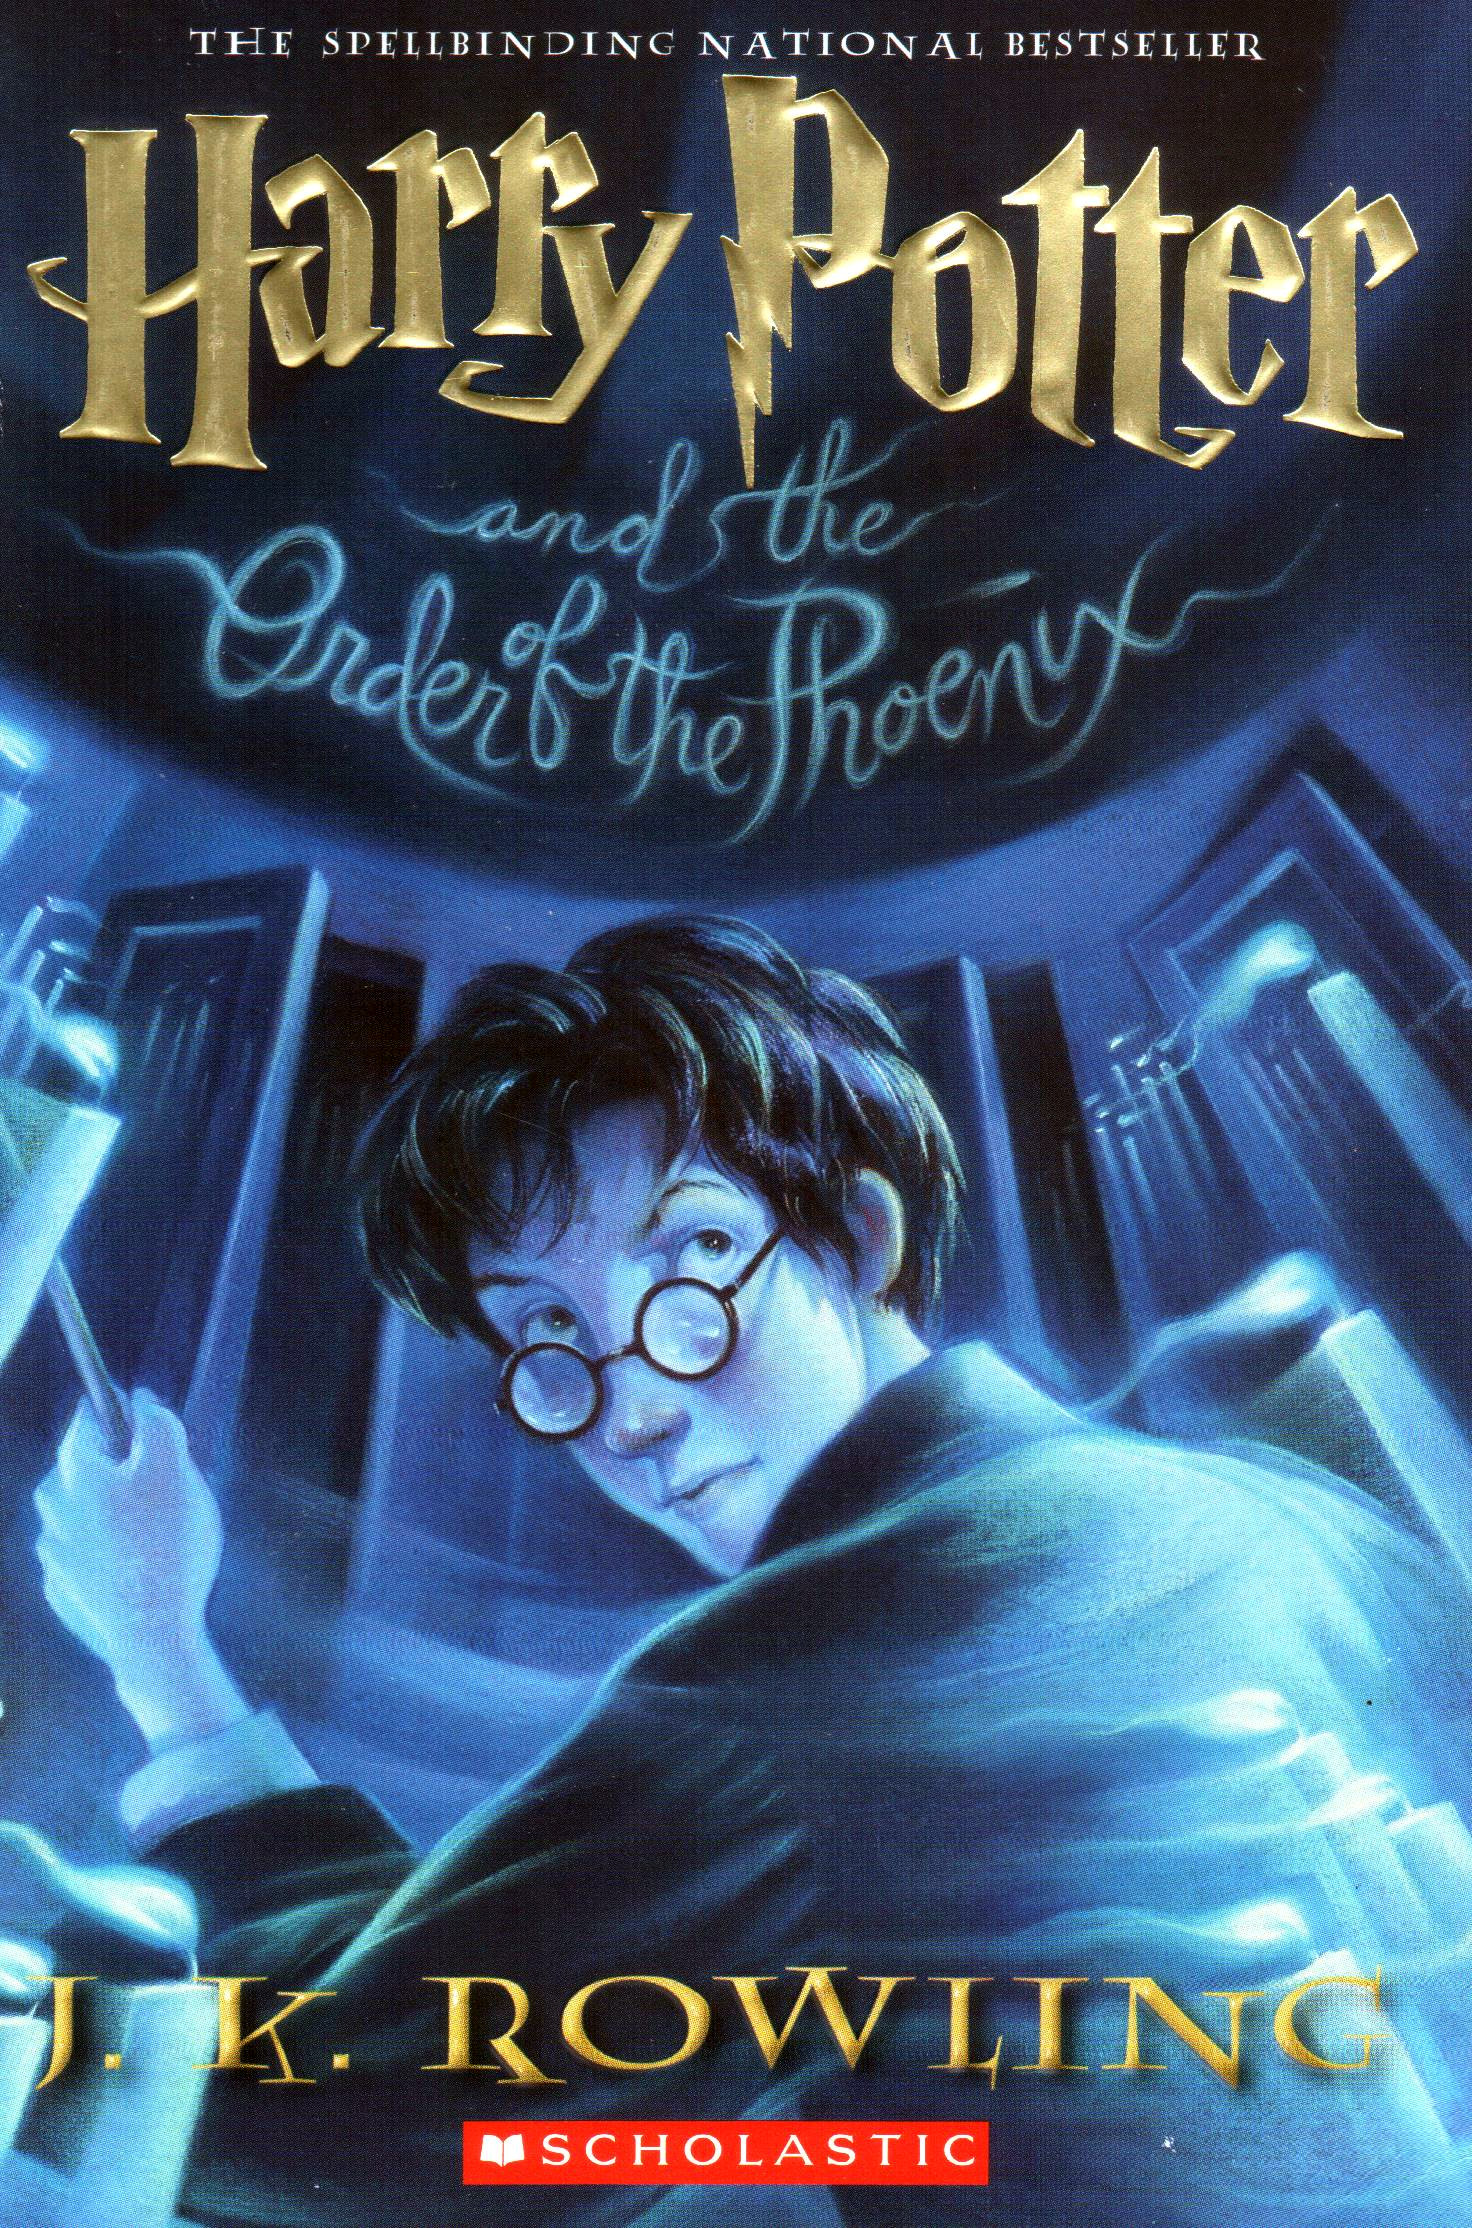 Harry Potter (5) and the Order of the Phoenix